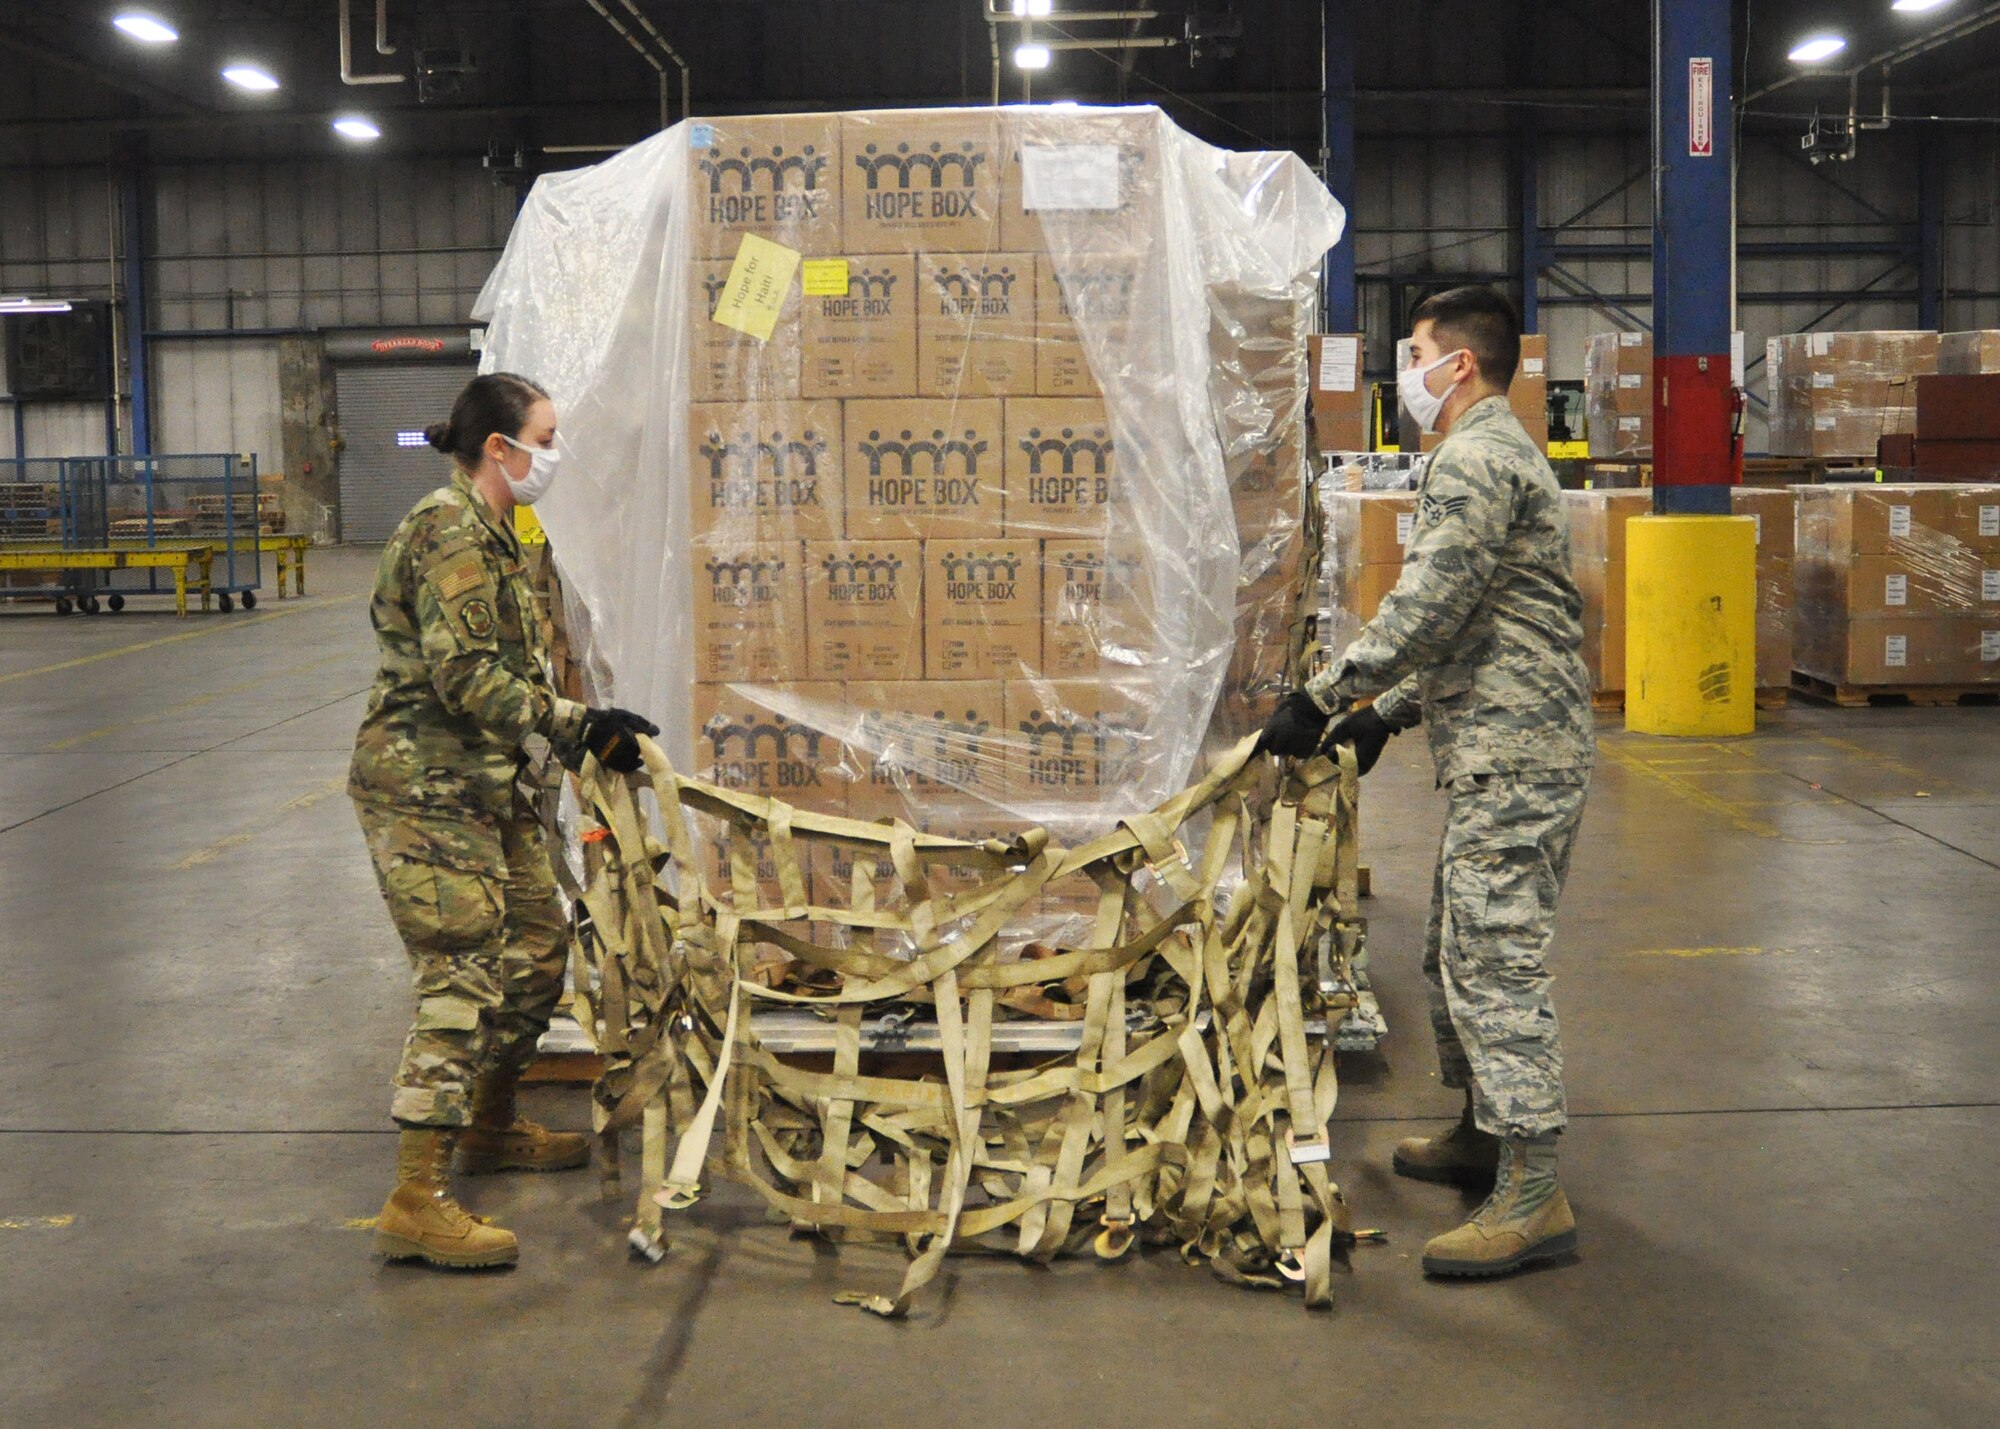 Senior Airmen Mariah Blankenship and Dan Iwamoto, both 87th Aerial Port Squadron cargo handling technicians, prepare a pallet of Hope Boxes destined for Port-au-Prince, Haiti. Each individual Hope Box contains nutritious food for 216 meals, along with a water filtration system to purify 100 gallons of water. In all, the 87th APS processed more than 300 Hope Boxes during the October UTA.